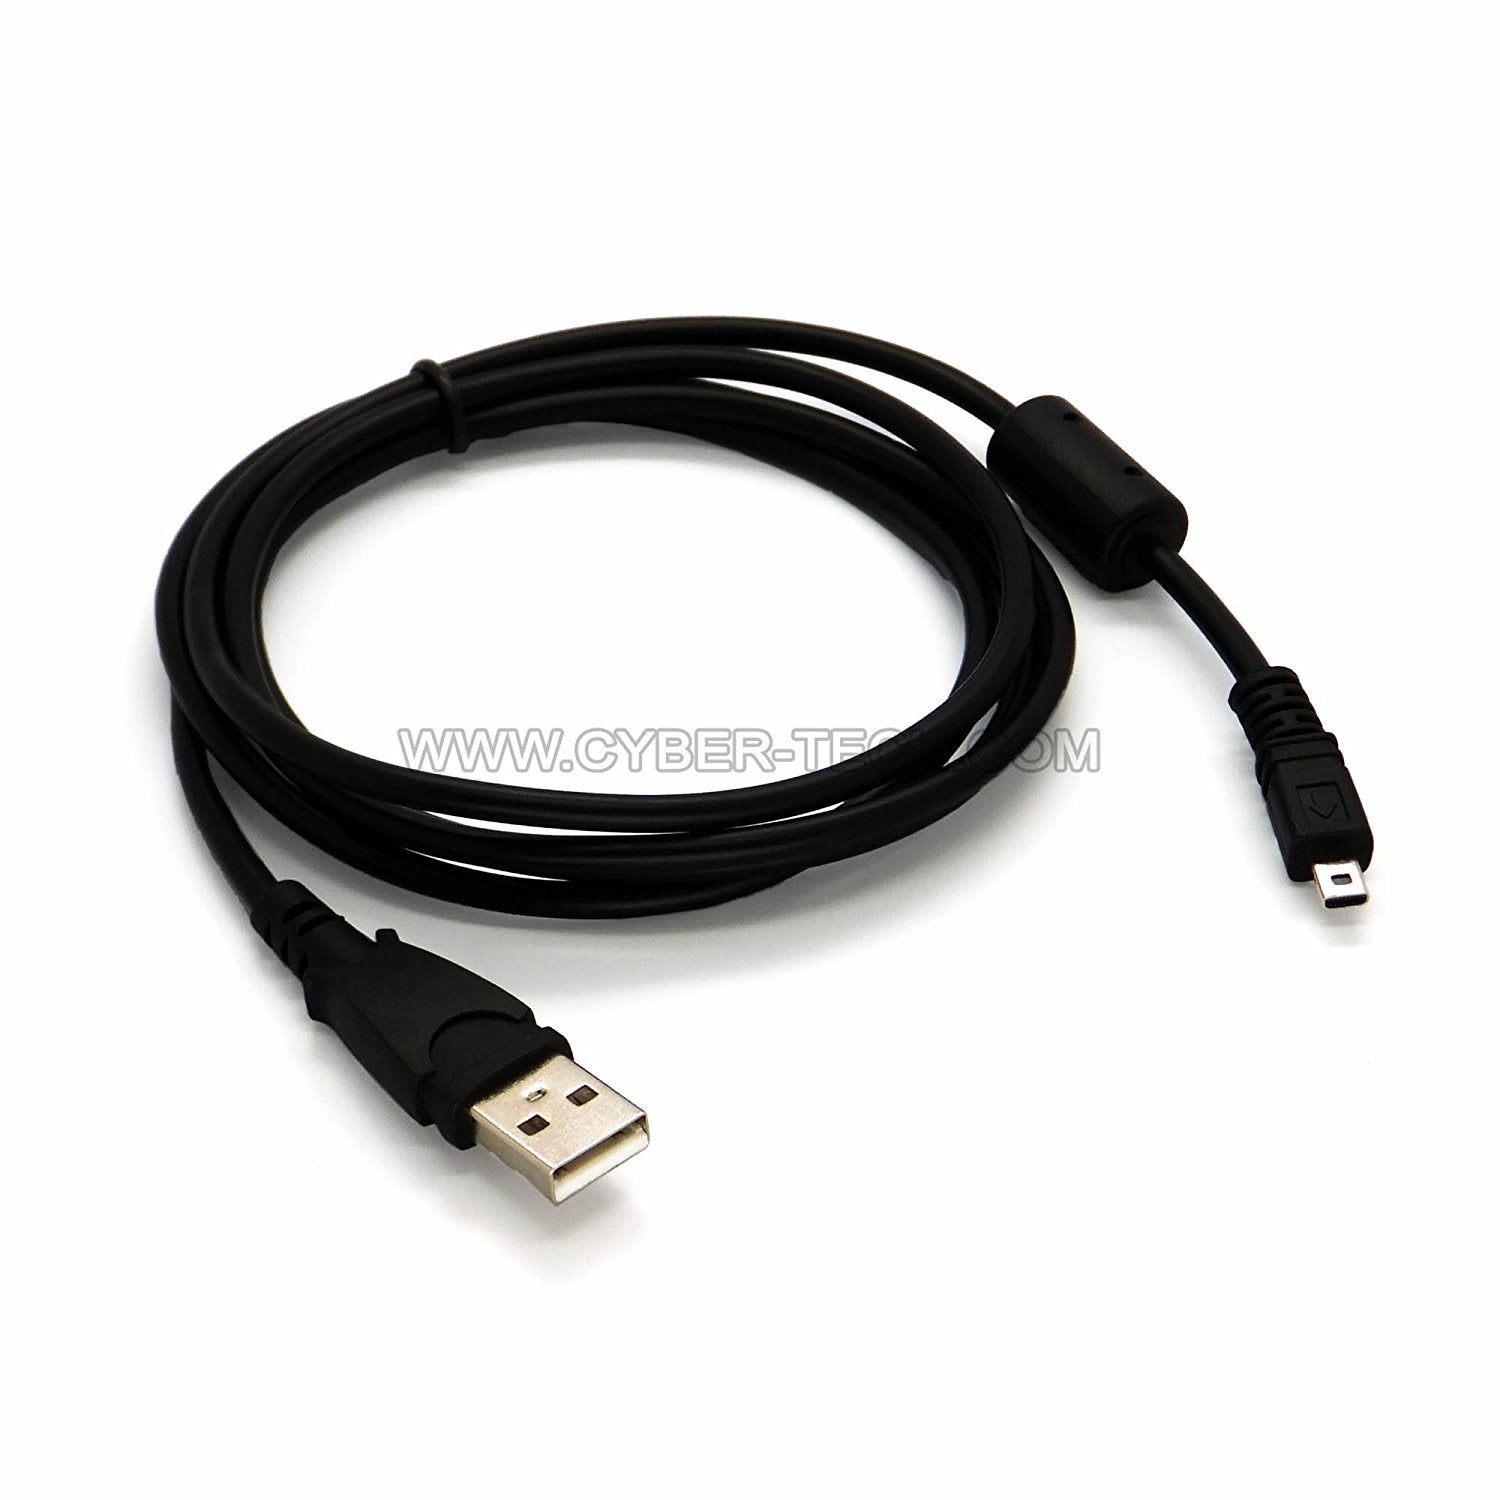 High speed USB data cable for hp digital still camera CA340, CA350, CB350, CW450, CW450T, PB360t, SB360 SW350, SW450, PW460T and PW550.